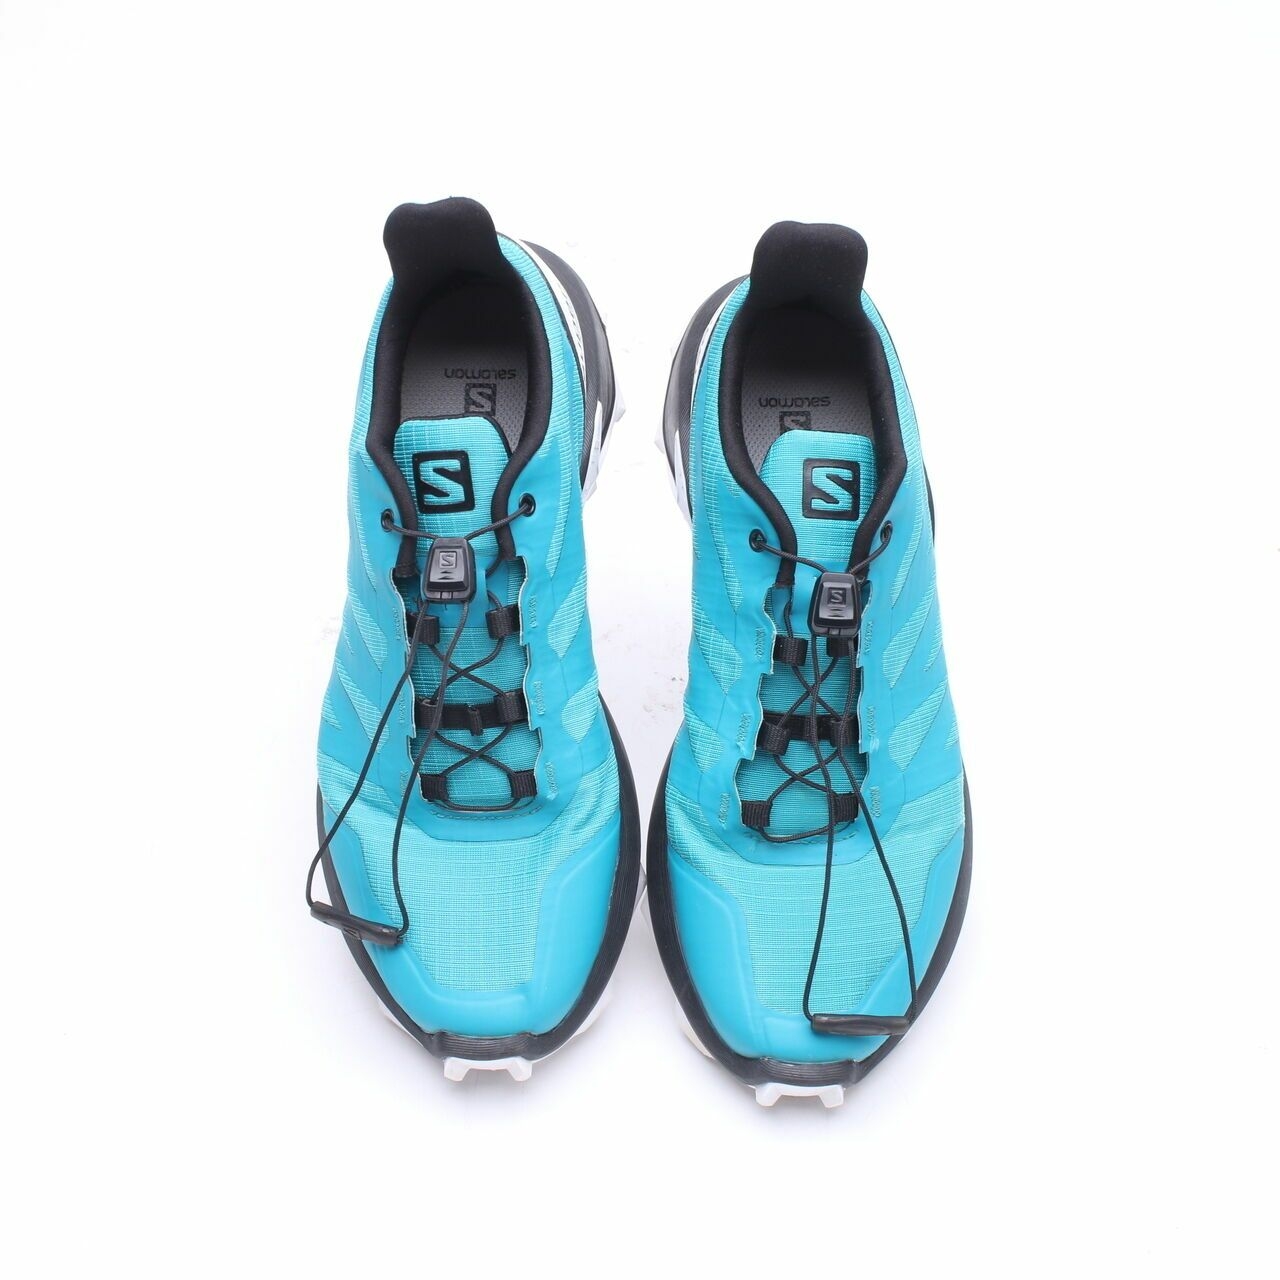 Salomon  Supercross Women's Trail Running Shoes Turquoise Turquoise Sneakers